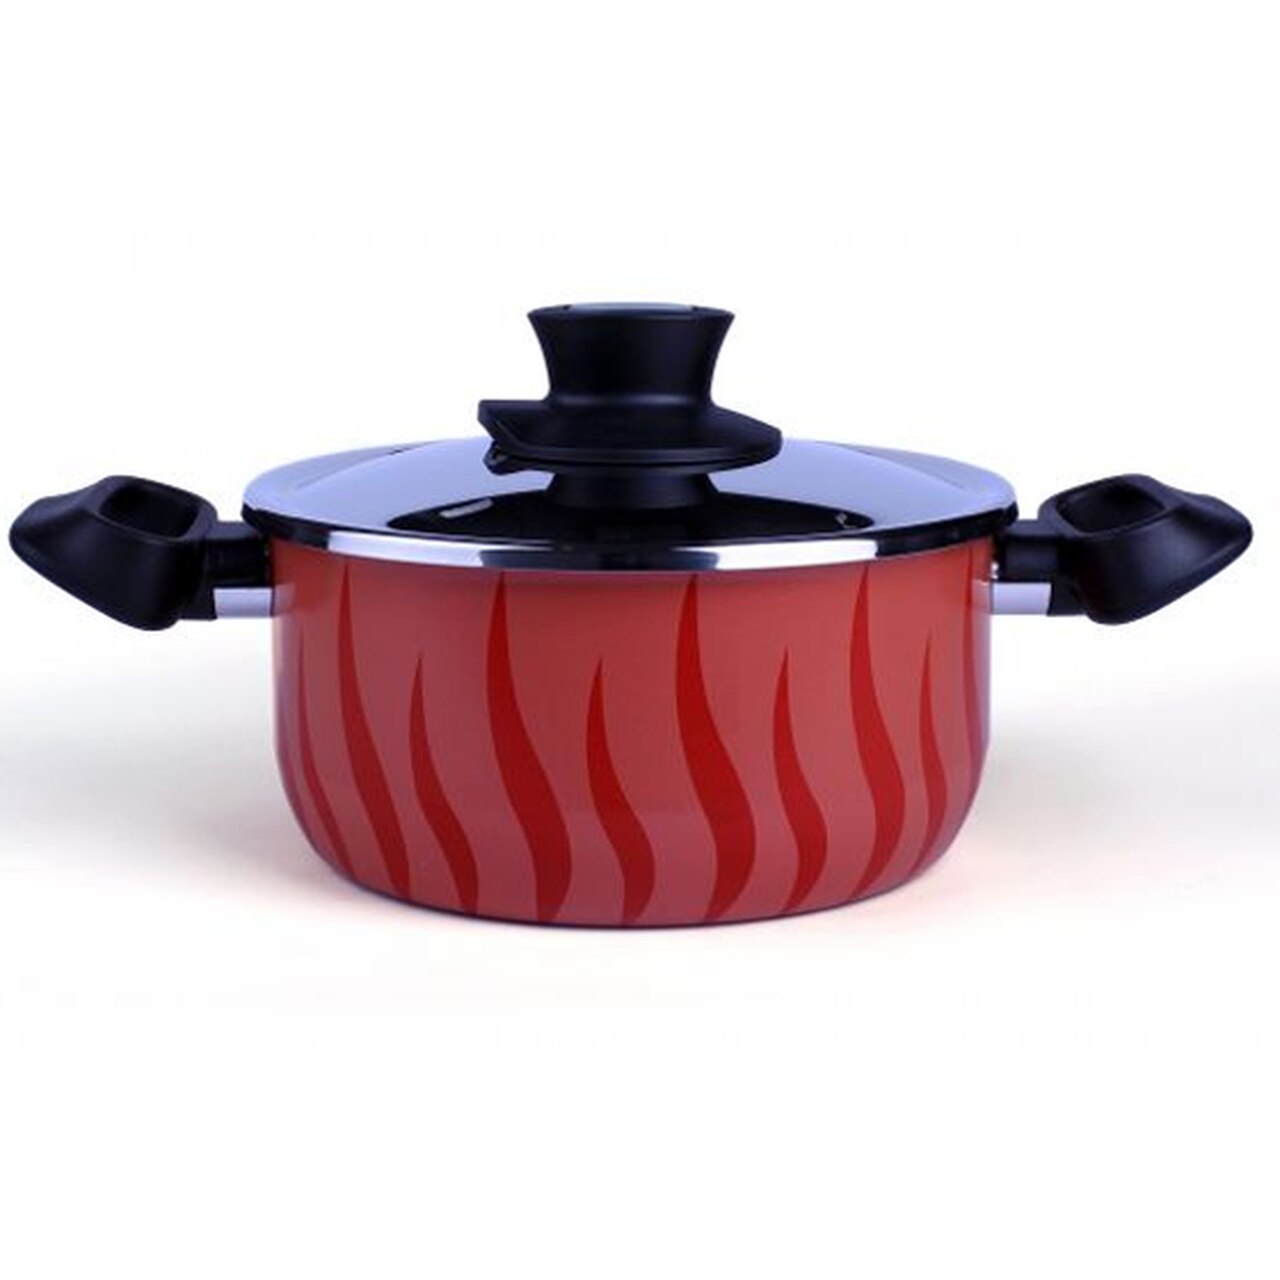 Tefal C5485282 Tempo Casserole with Lid, Red, 26 cm